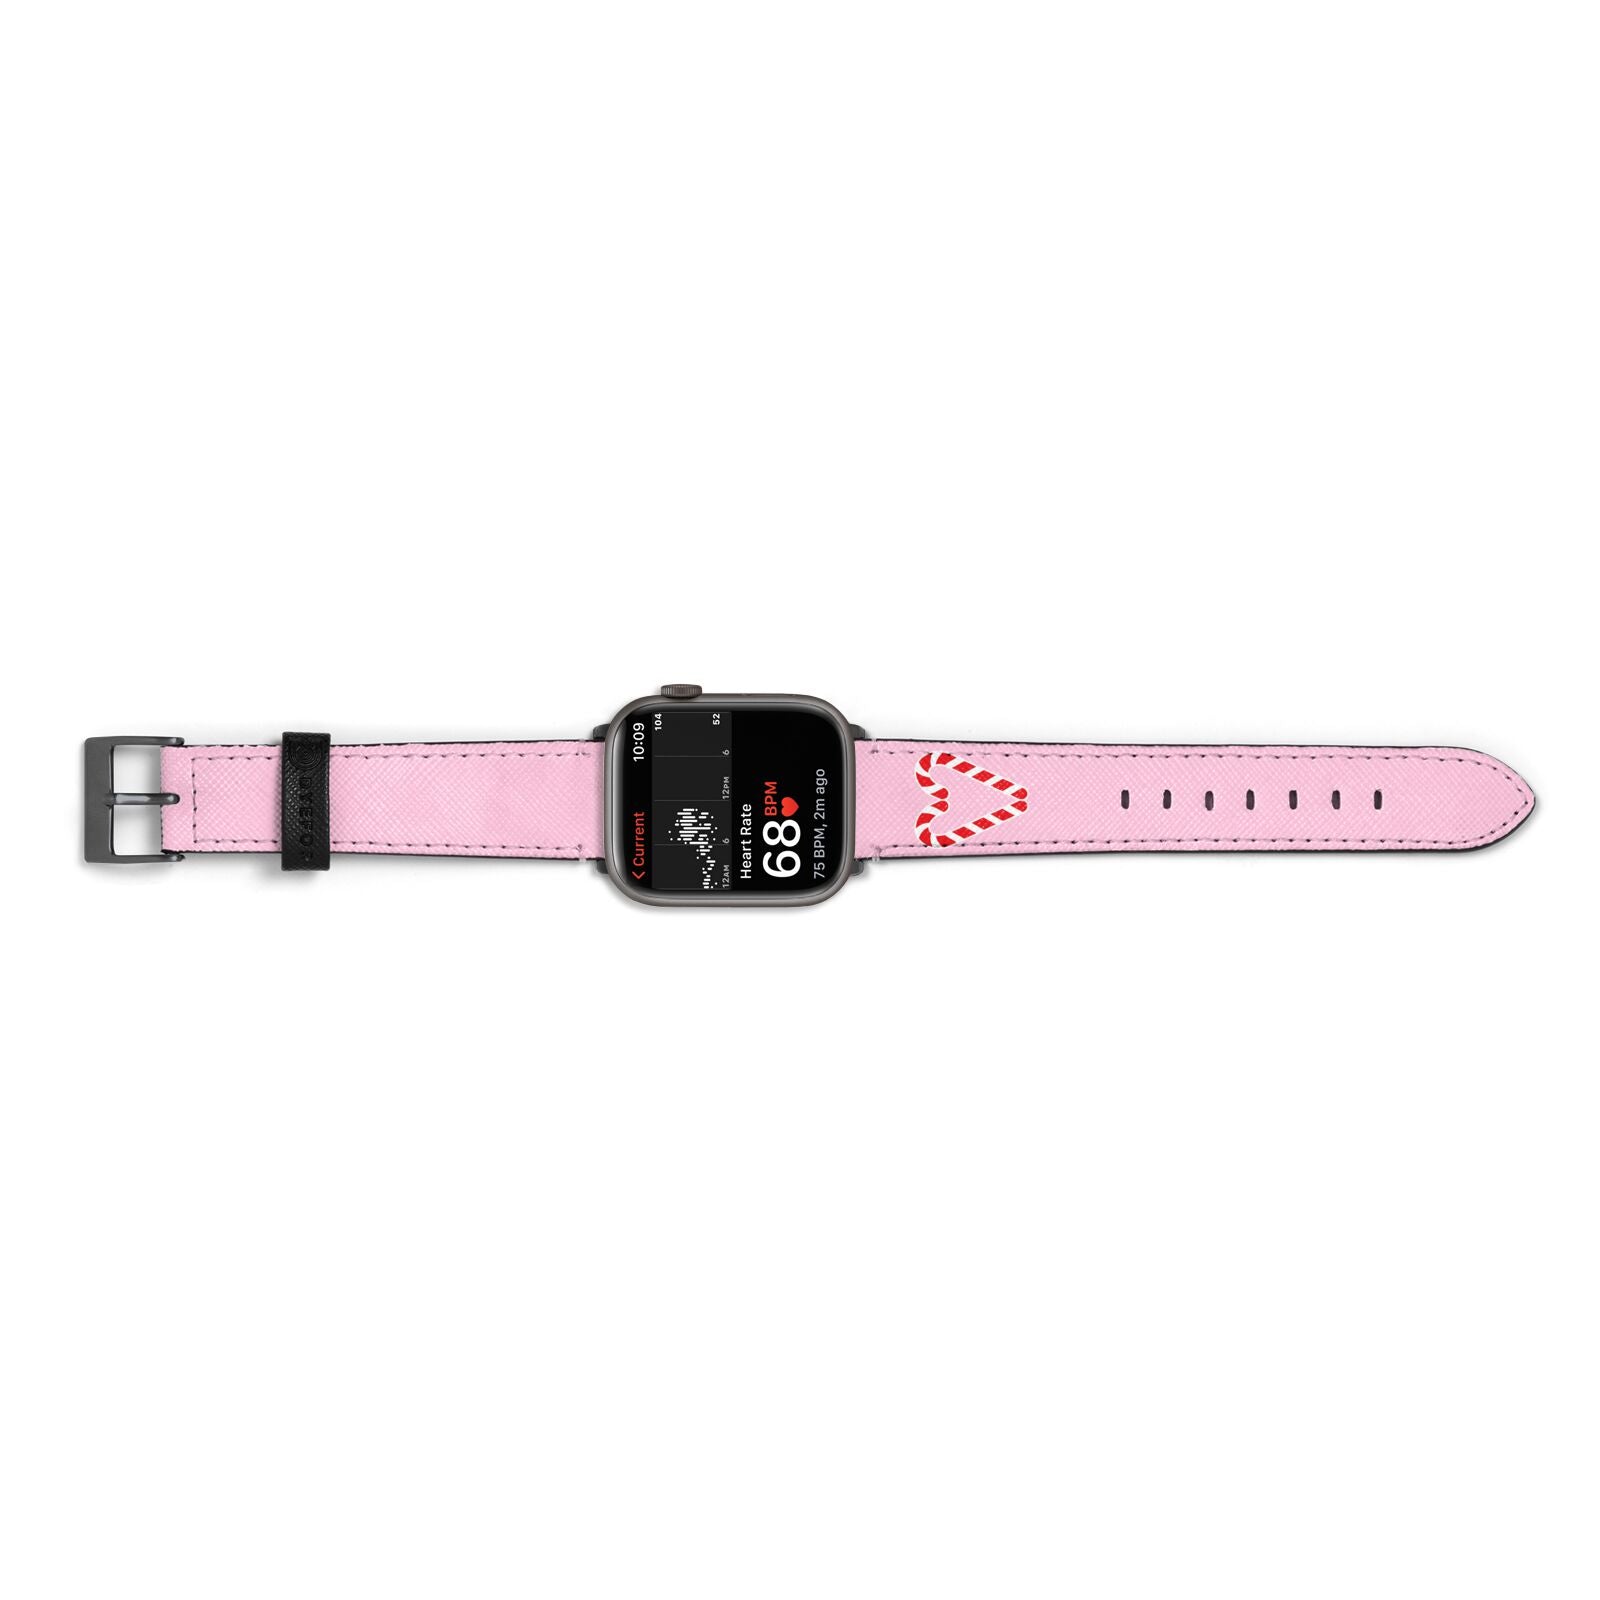 Candy Cane Heart Apple Watch Strap Size 38mm Landscape Image Space Grey Hardware